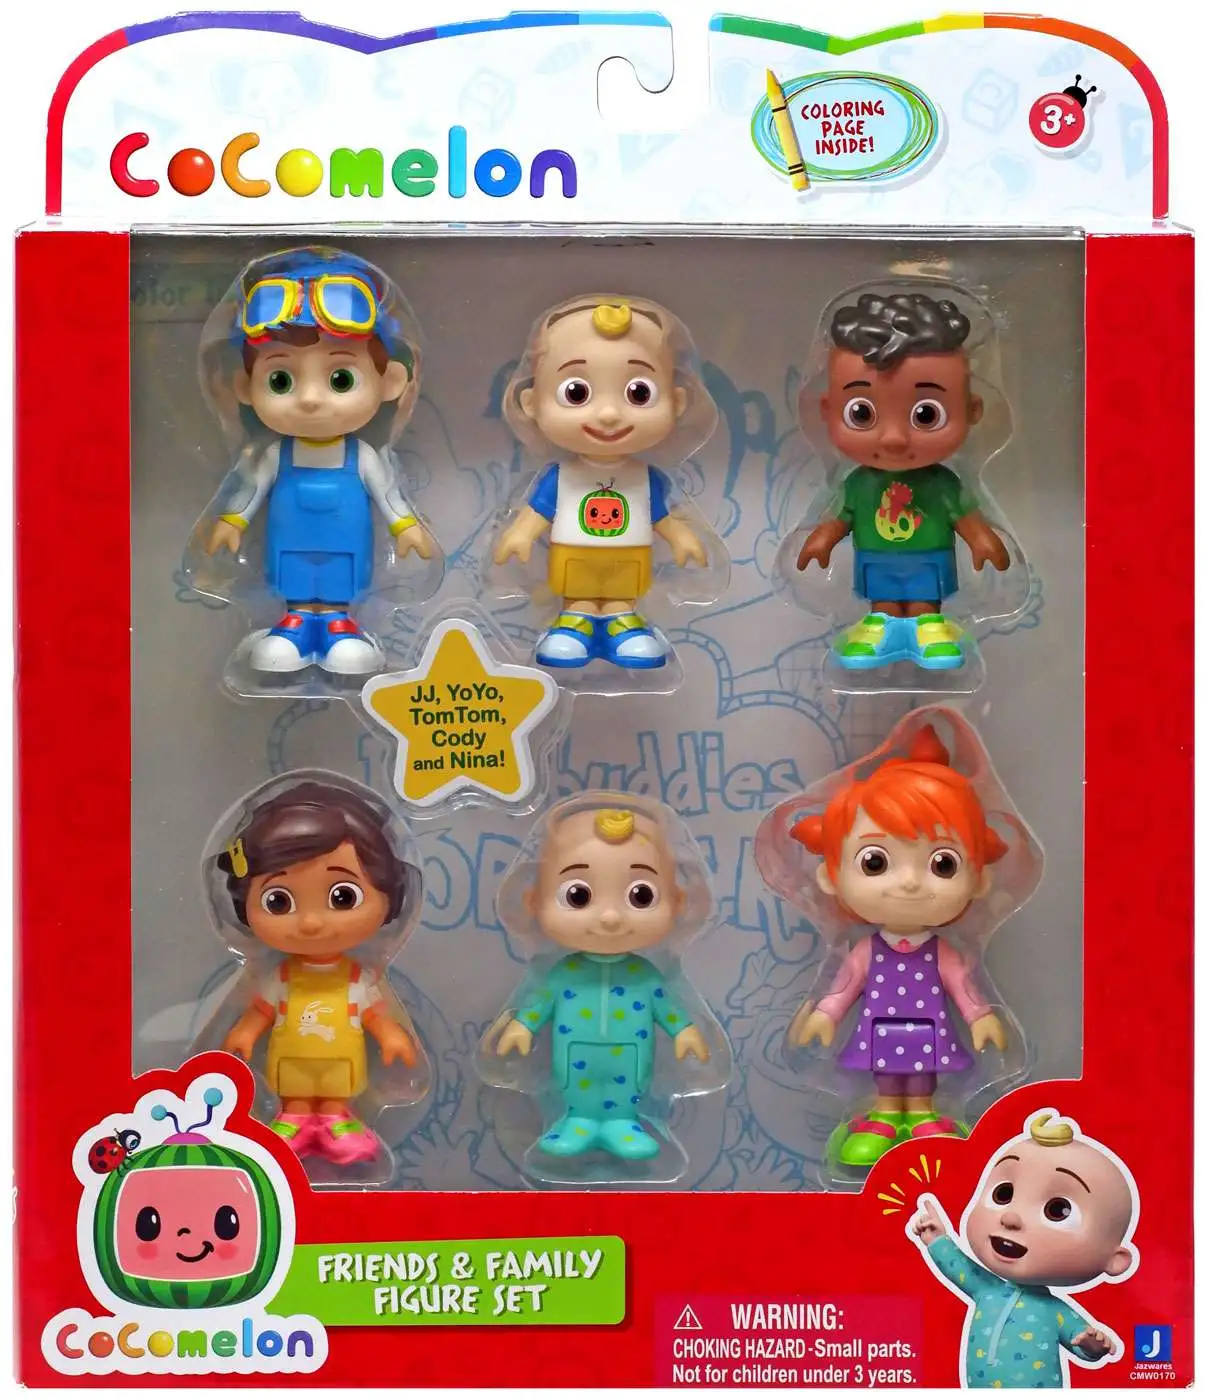 Kidscreen » Archive » CoComelon partners with Jazwares on first CP